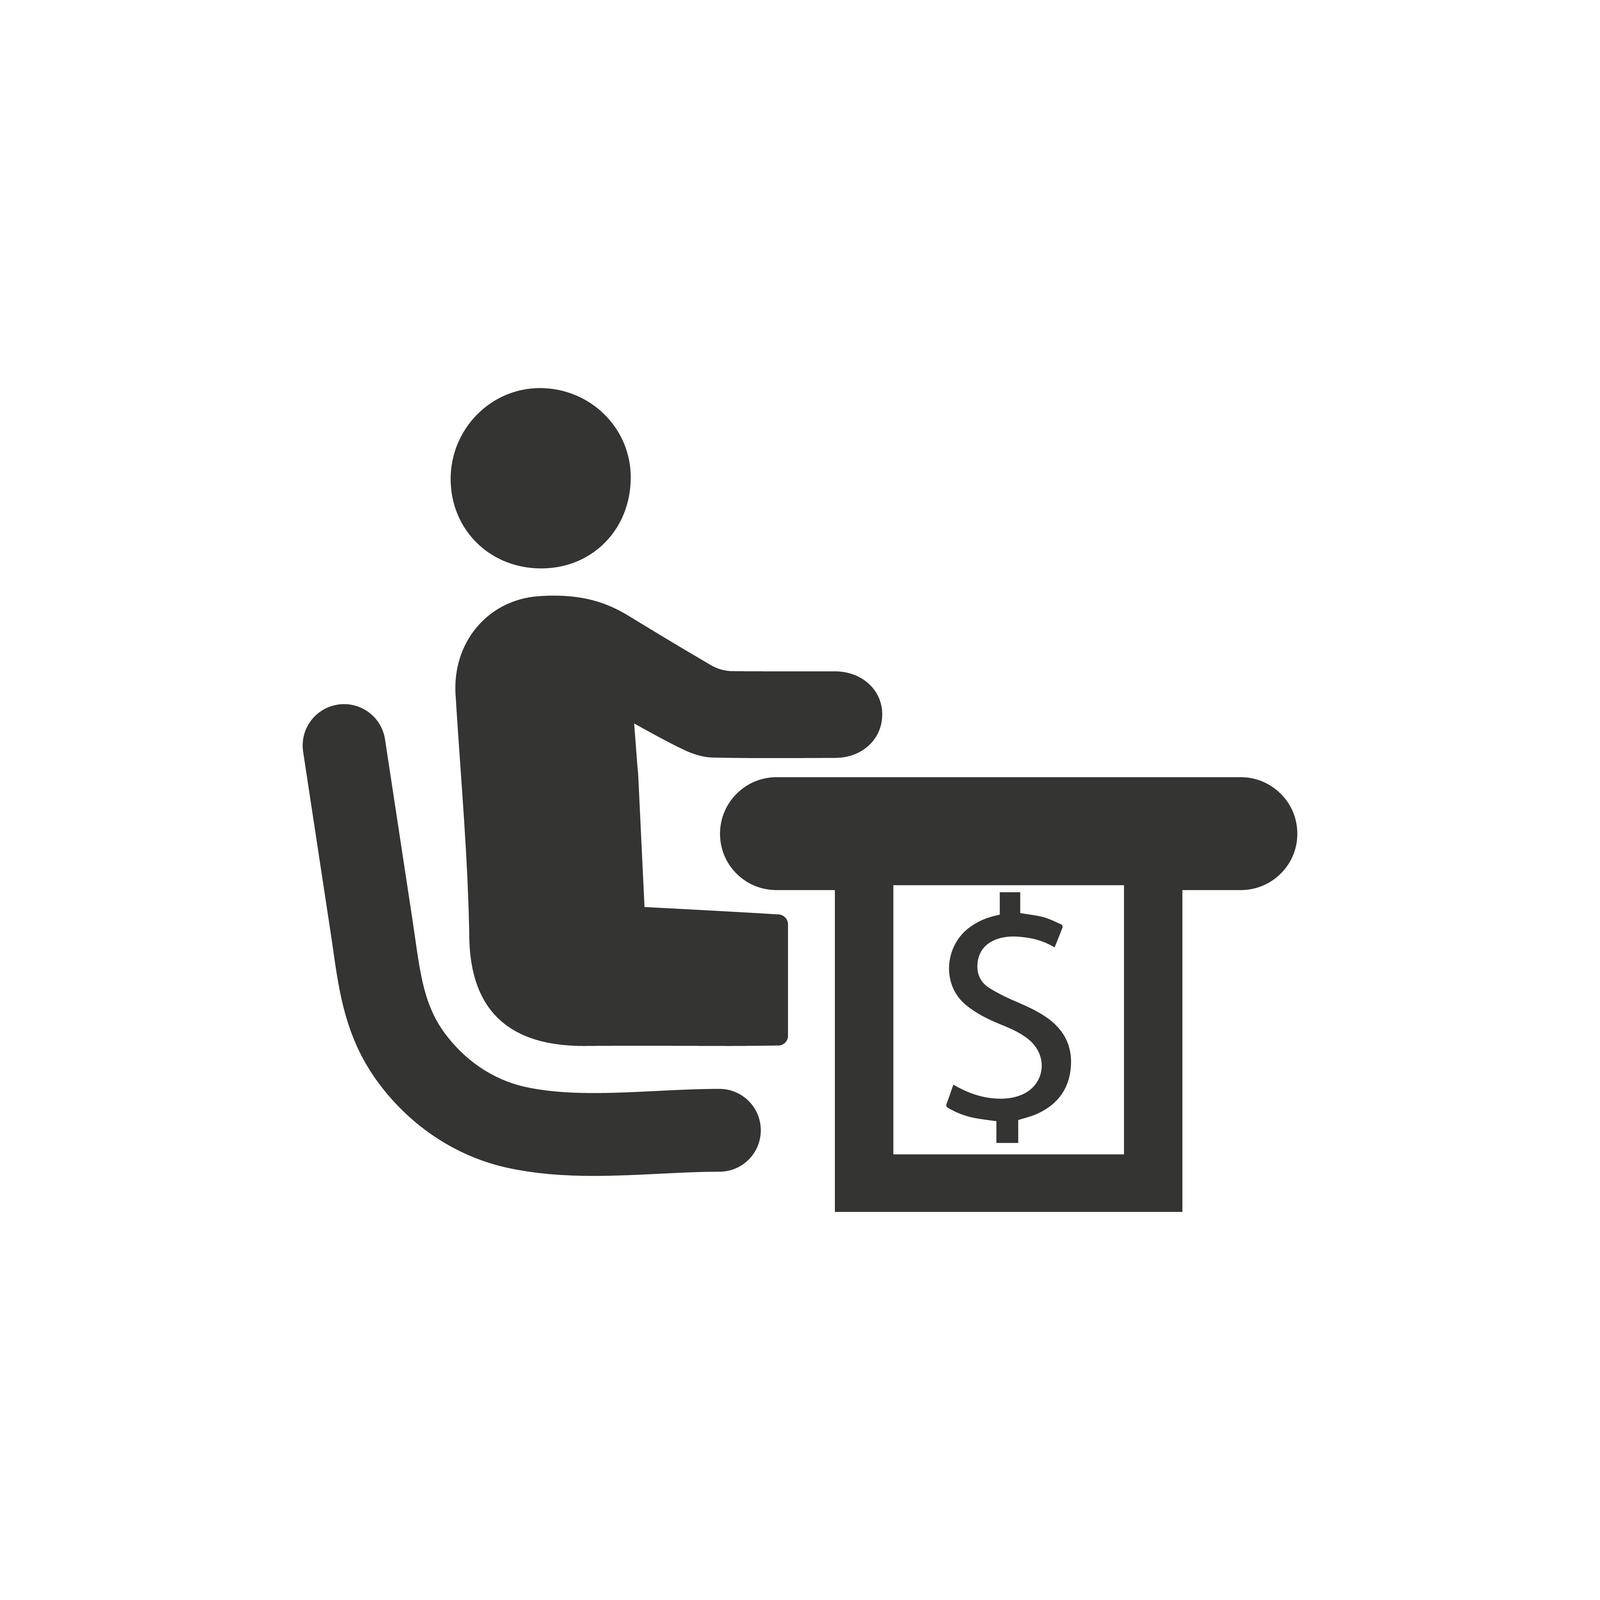 Financial Manager icon. Vector EPS file.